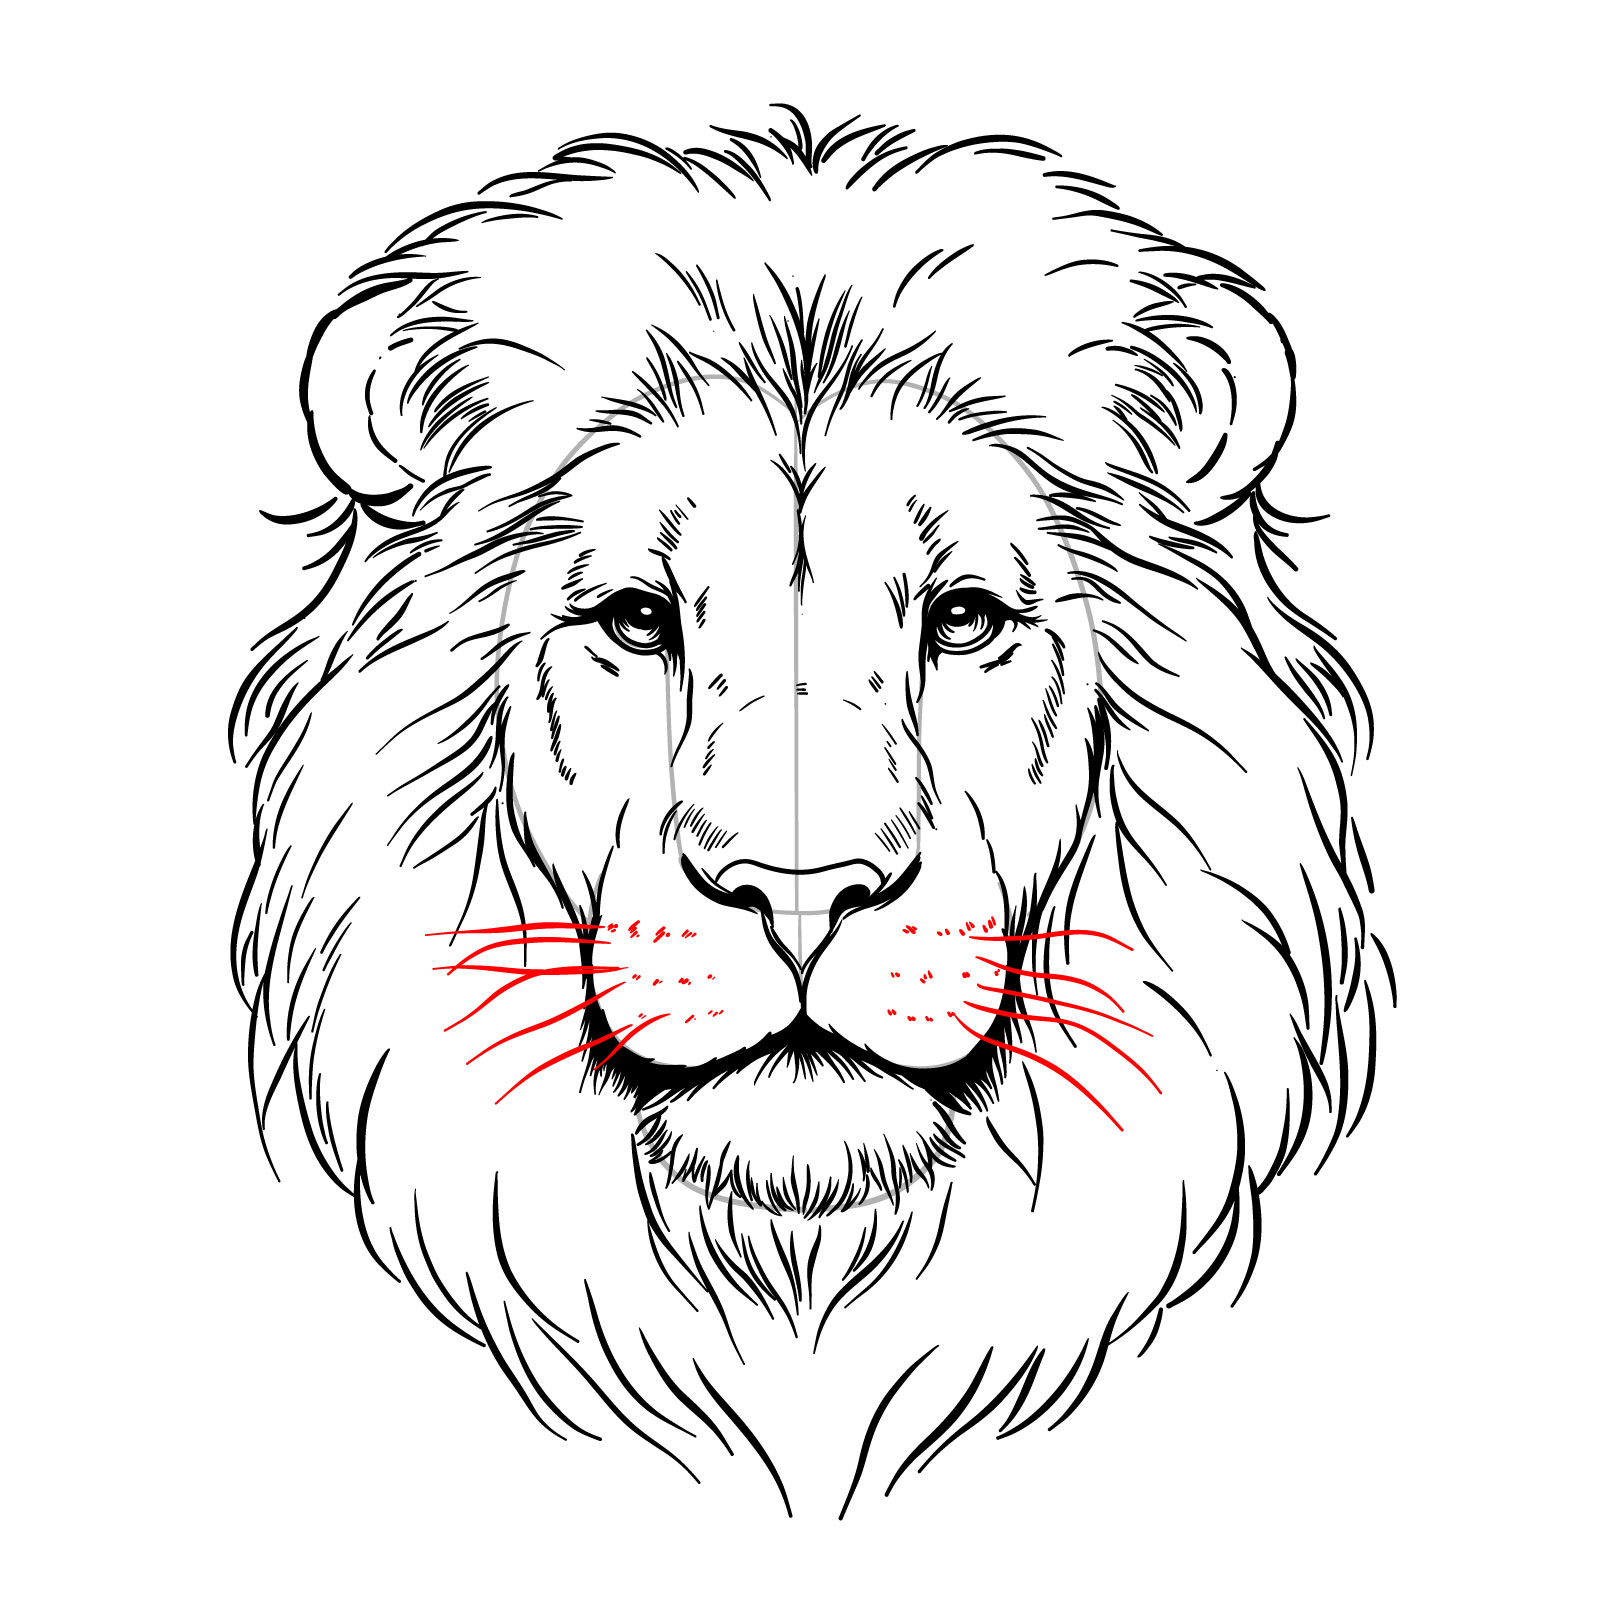 Sketching whiskers and facial marks on a lion's face drawing - step 13